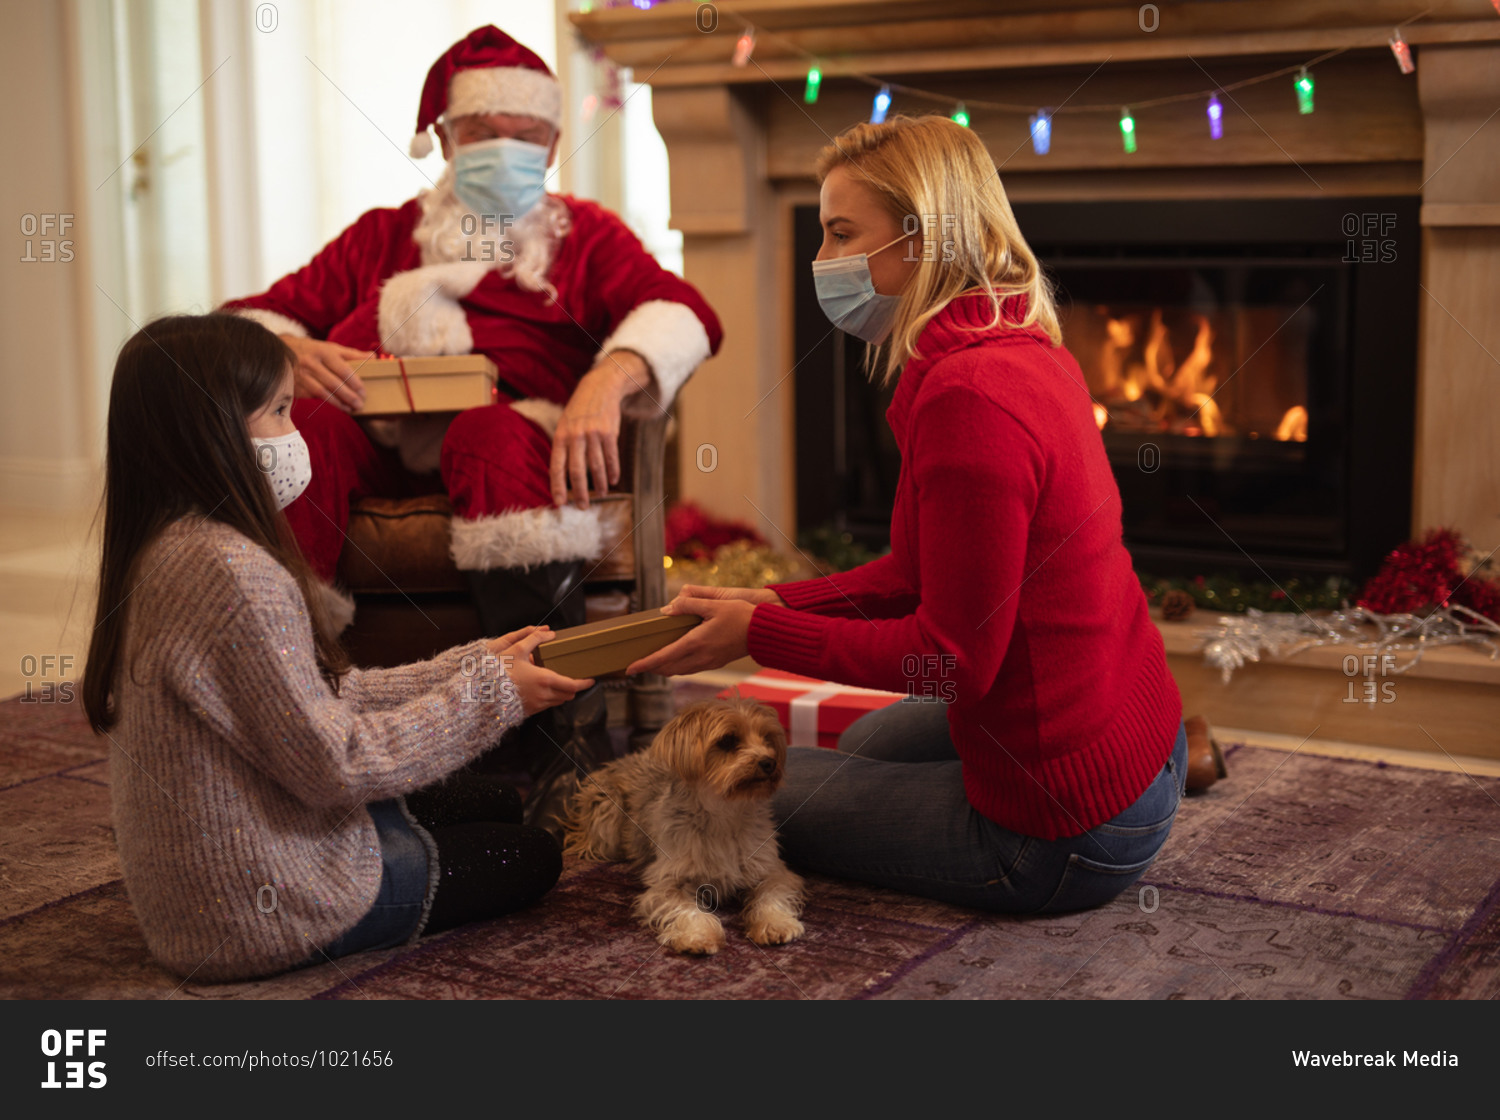 Senior Caucasian man, his adult daughter and granddaughter at home dressed as Father Christmas, wearing face mask, giving presents. Social distancing during Covid 19 Coronavirus quarantine lockdown.